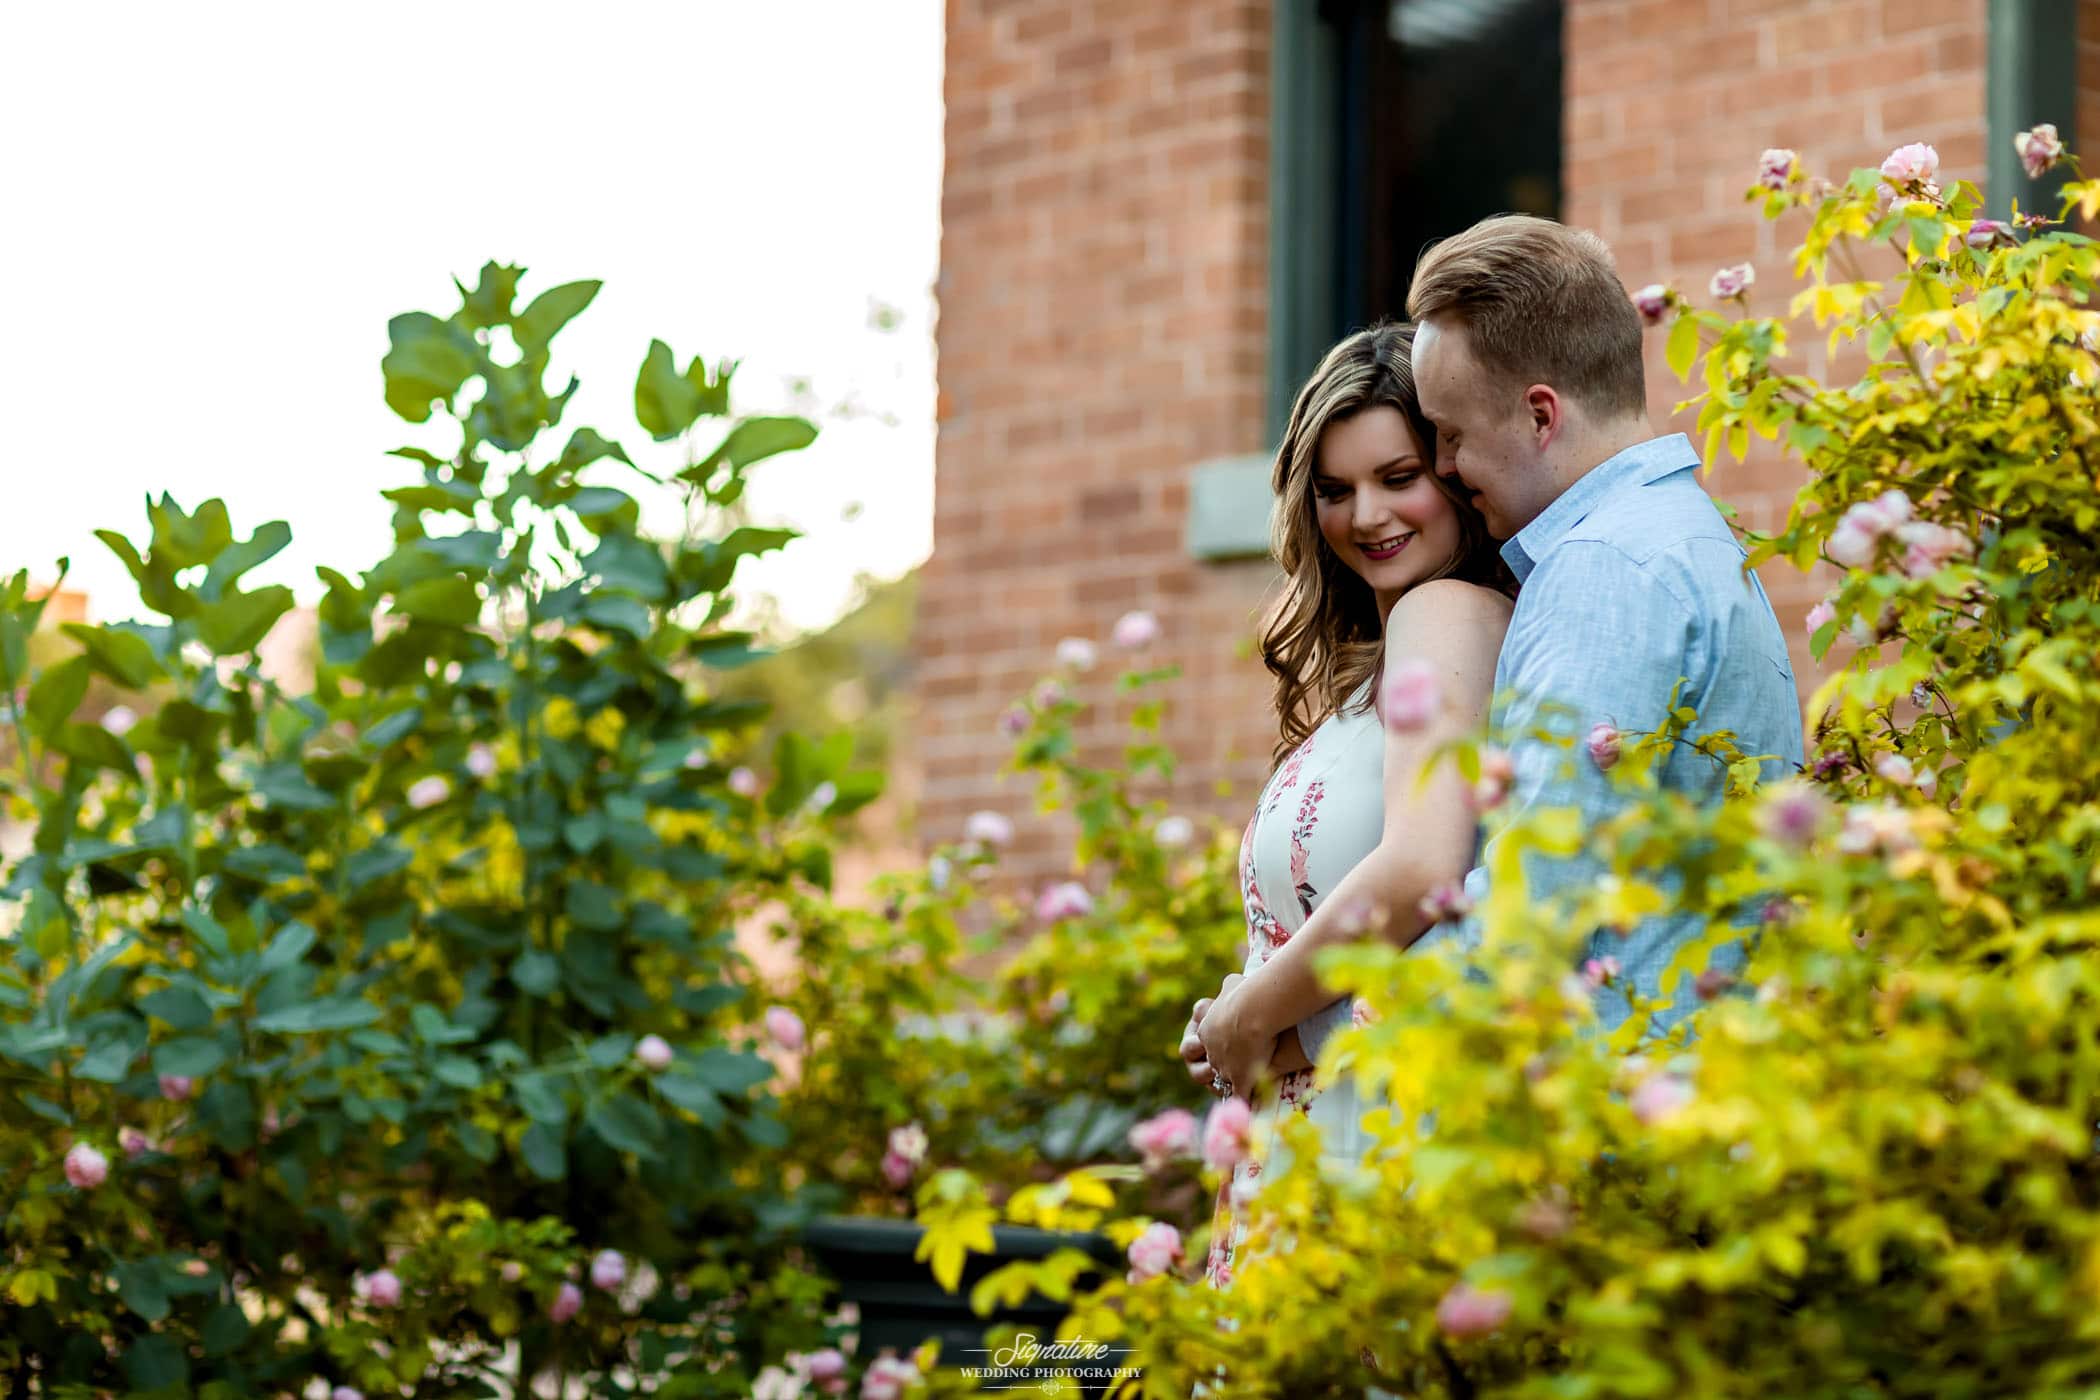 Man holding woman from behind smiling together in flower bush